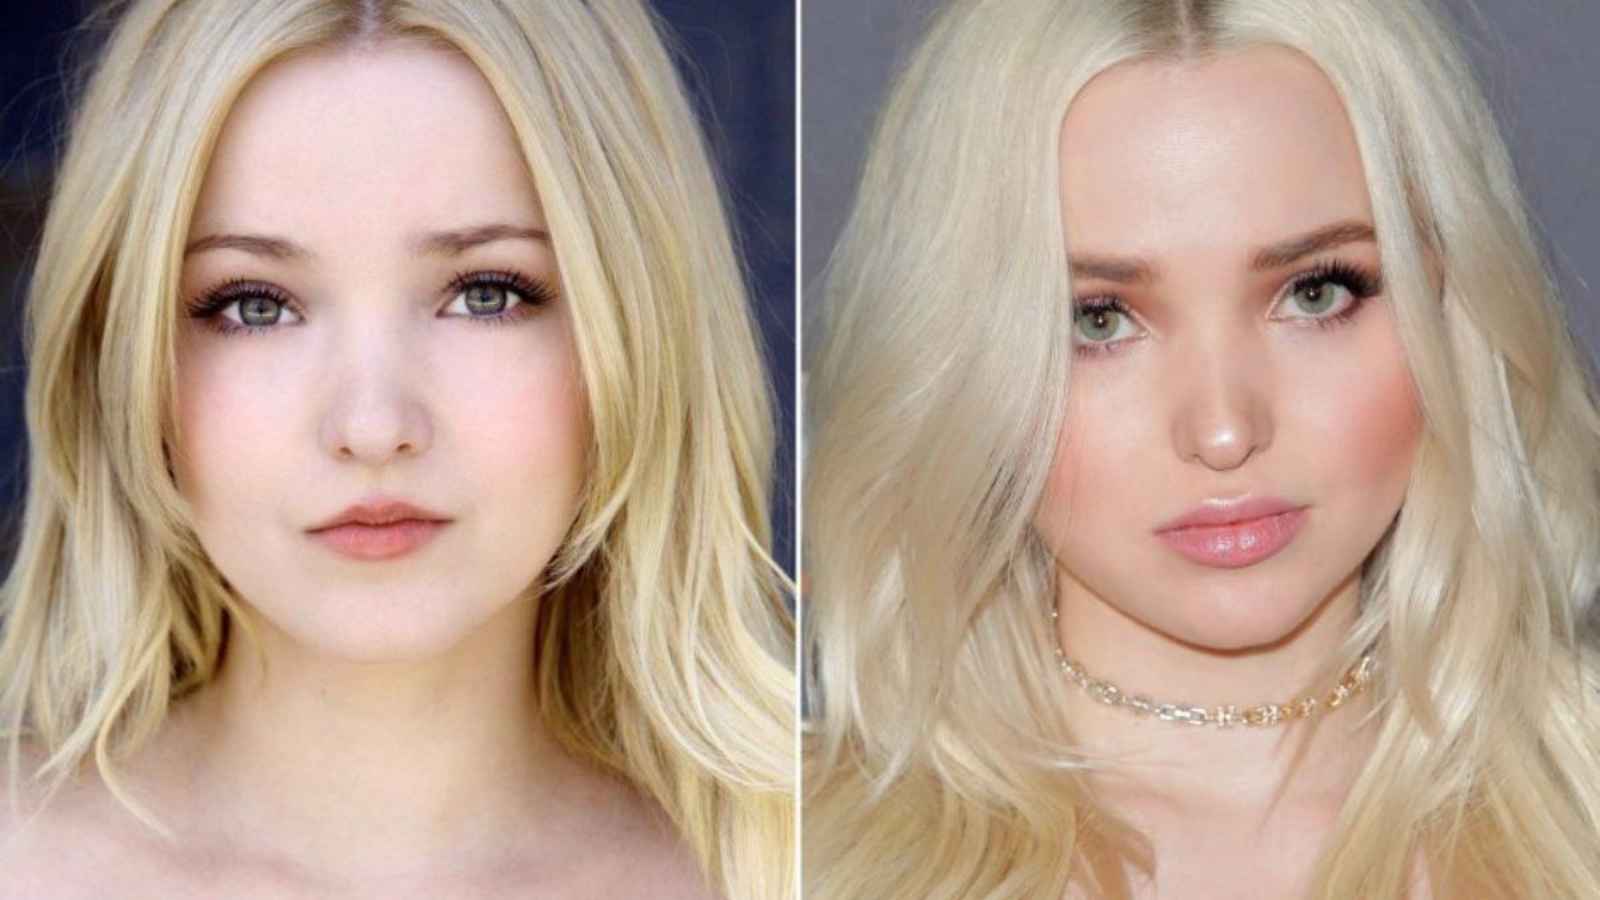 Dove Cameron before and after Plastic Surgery looks